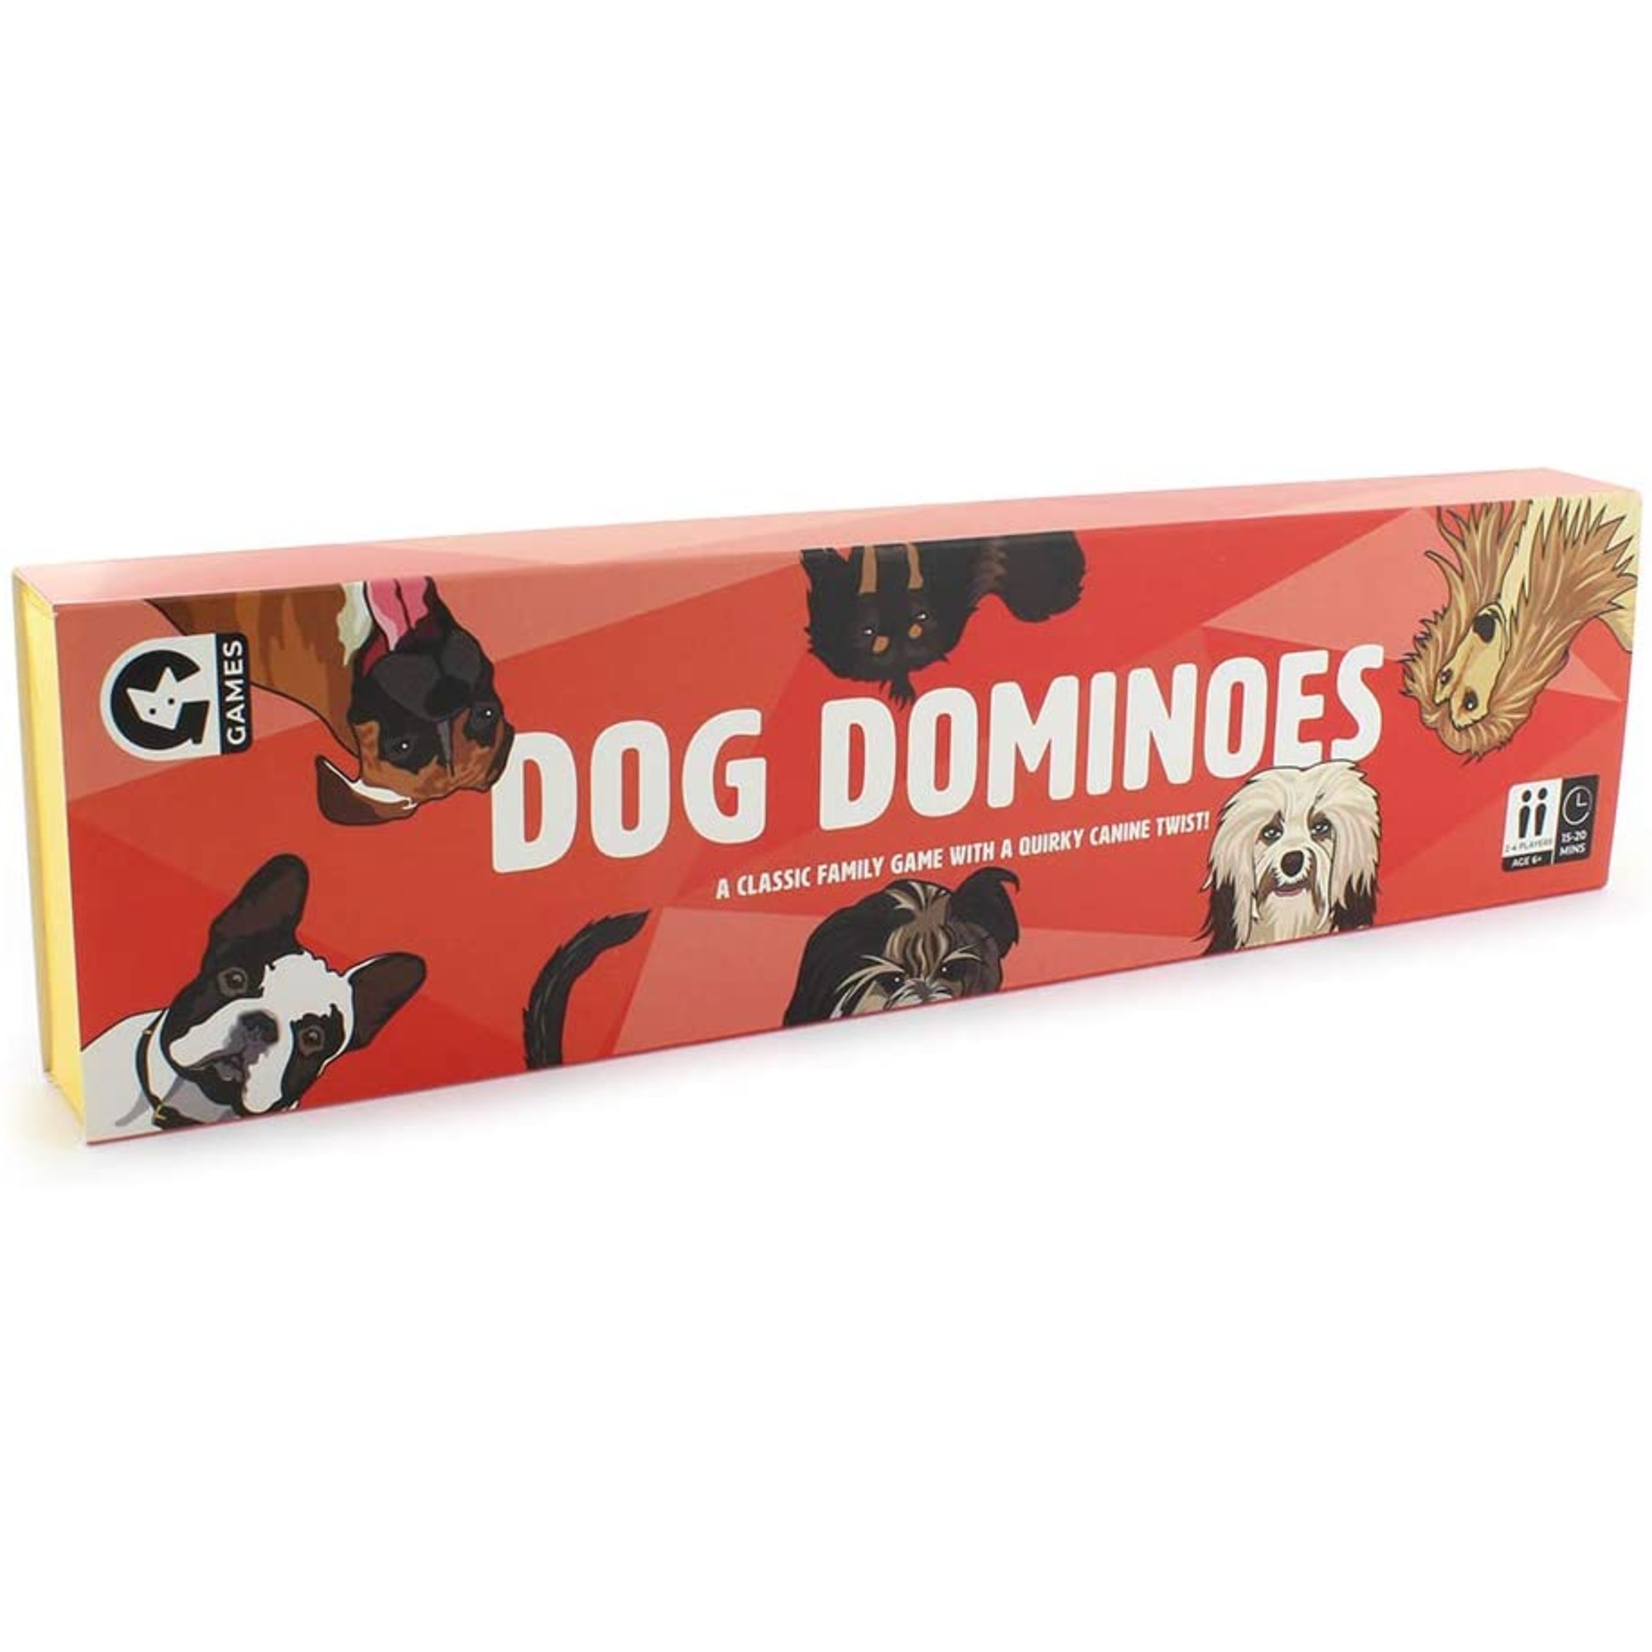 Ginger Fox Dog Dominoes: A Classic Family Game with a Quirky Canine Twist